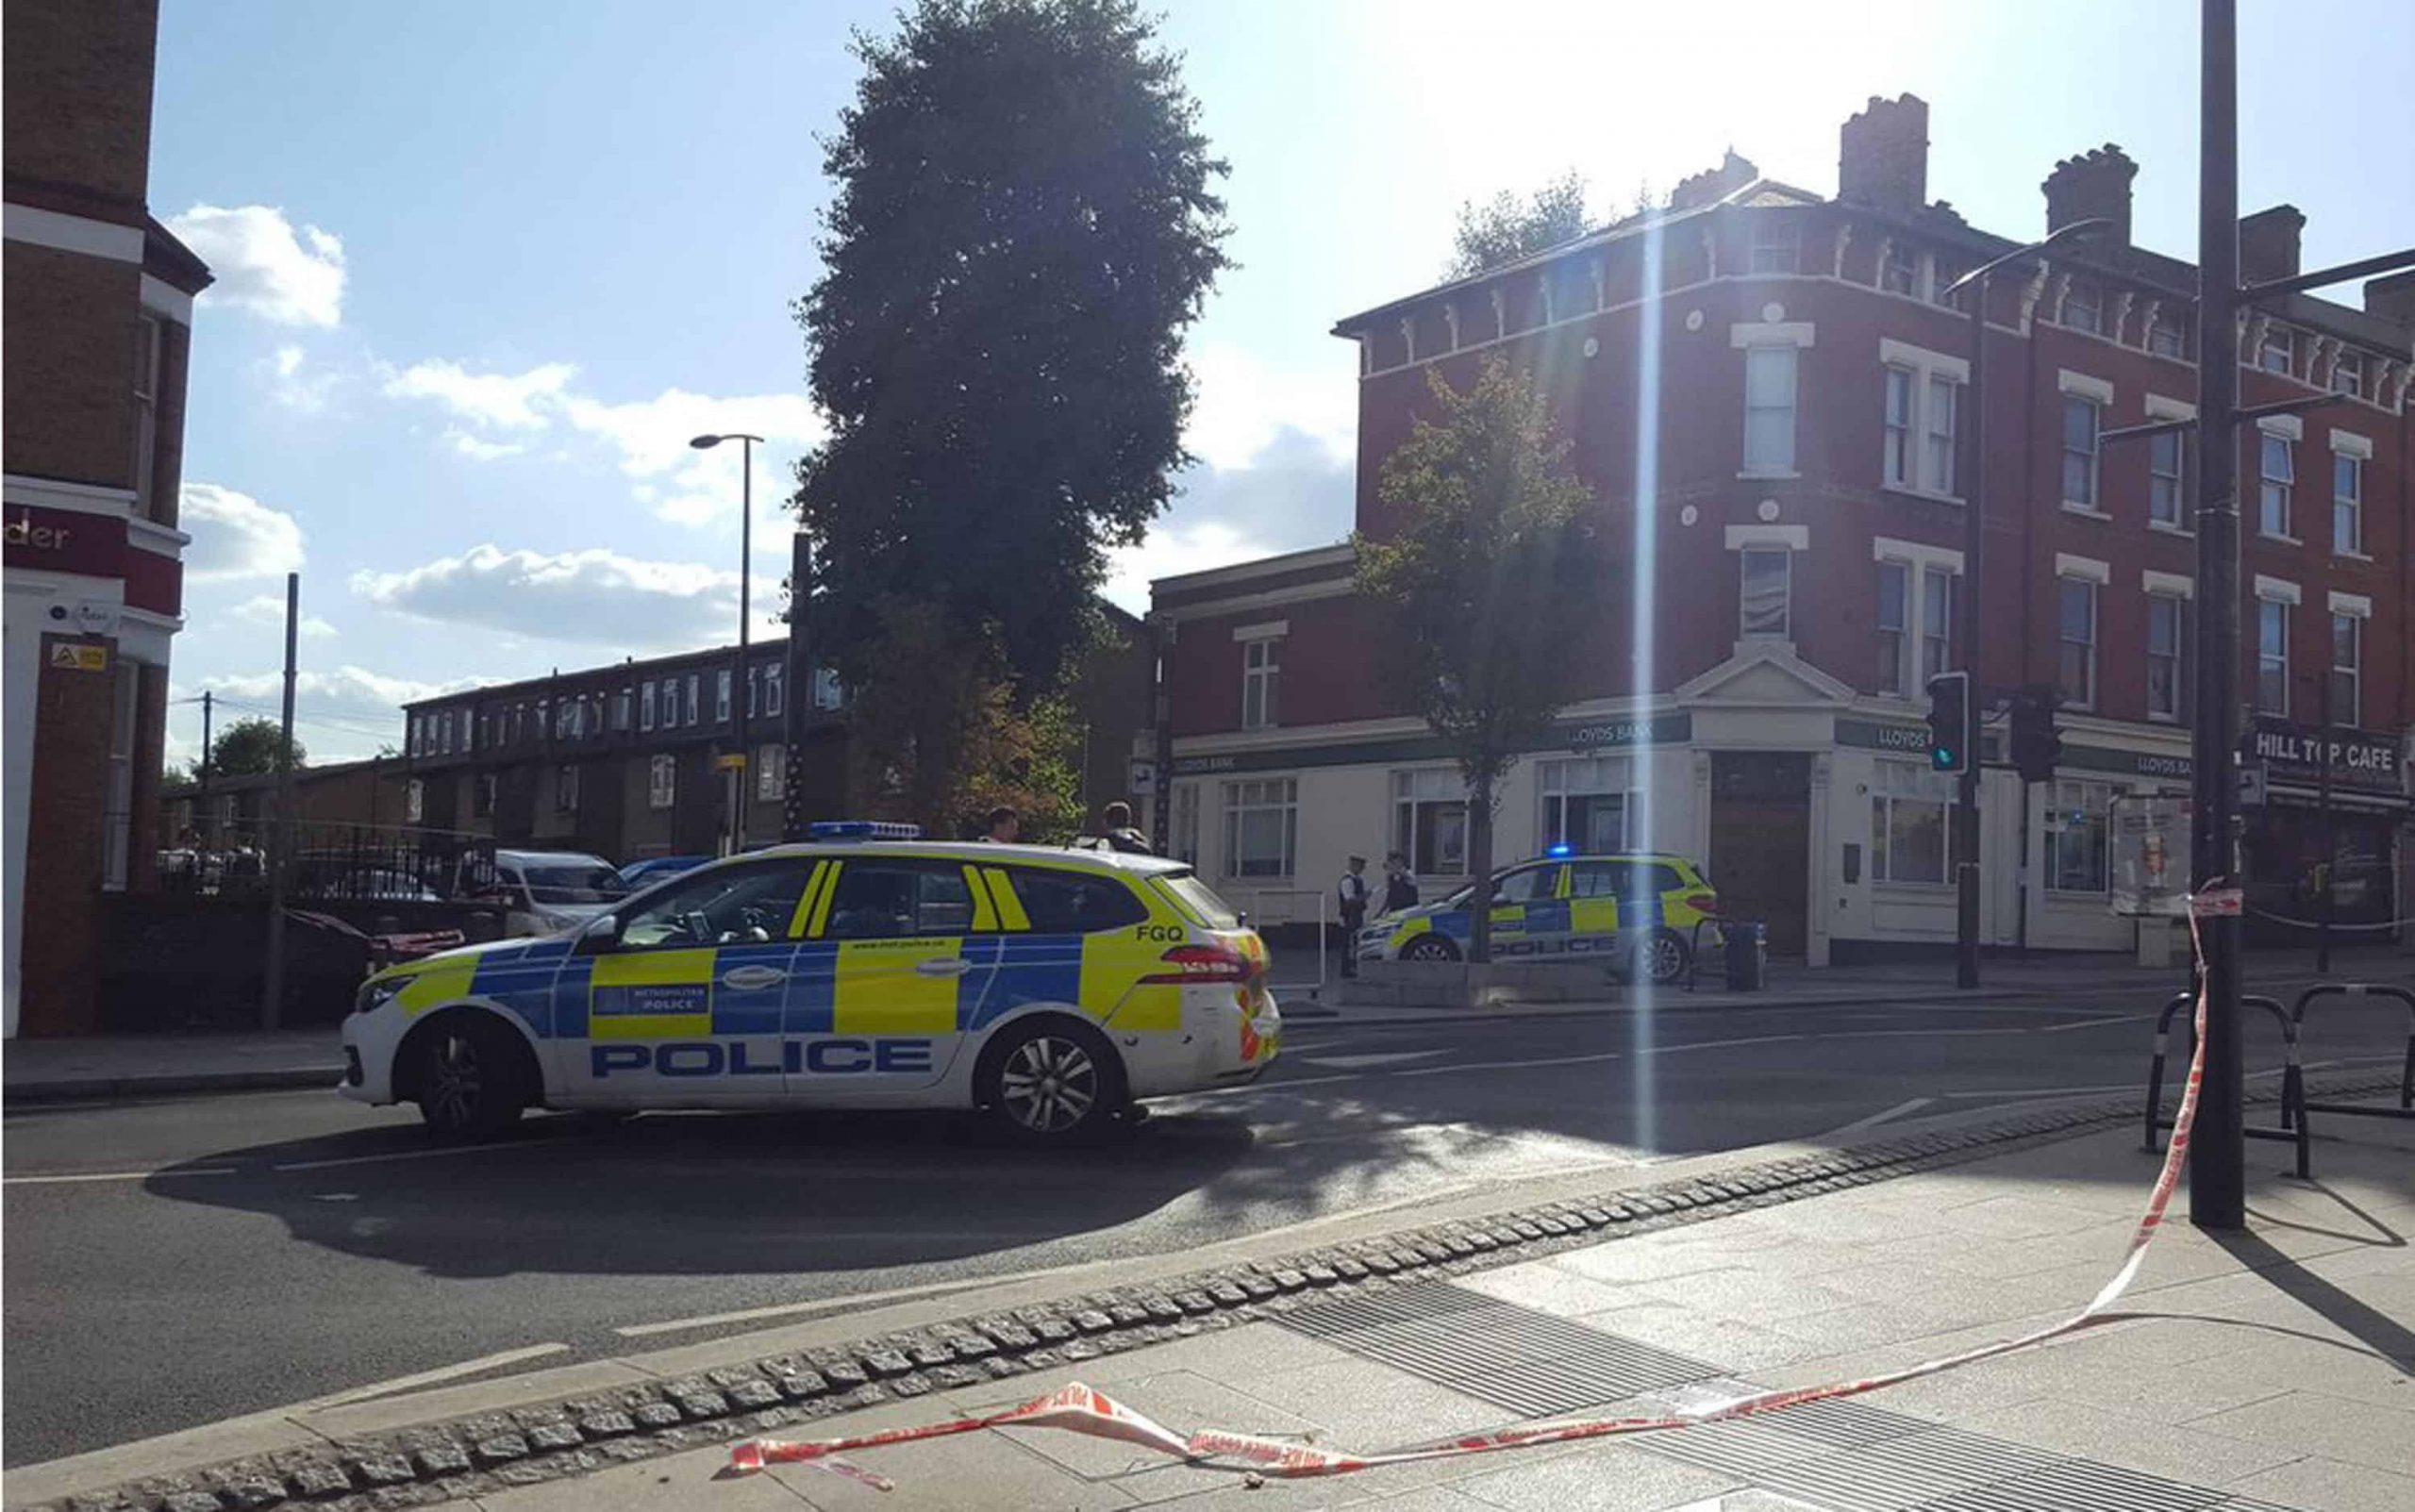 Man shot dead in South London in middle of day